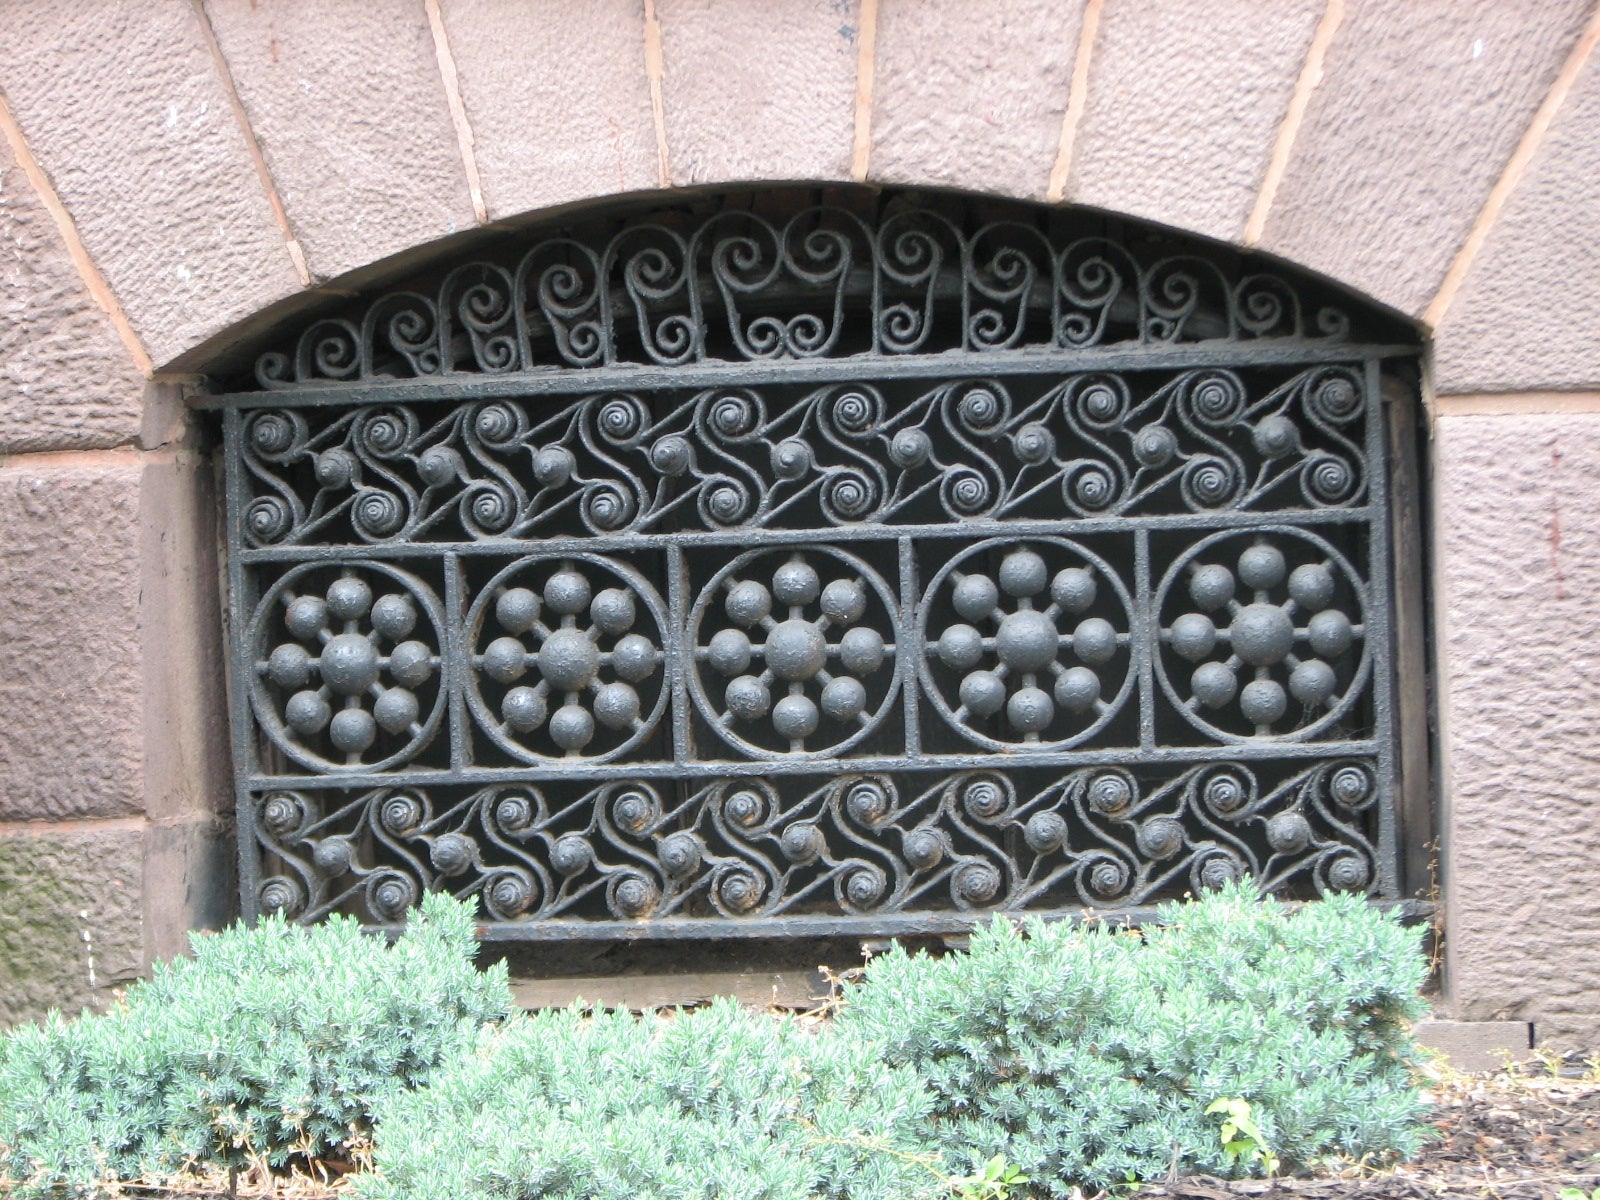 Original ironwork and other details adorn the well-maintained exterior of the house.